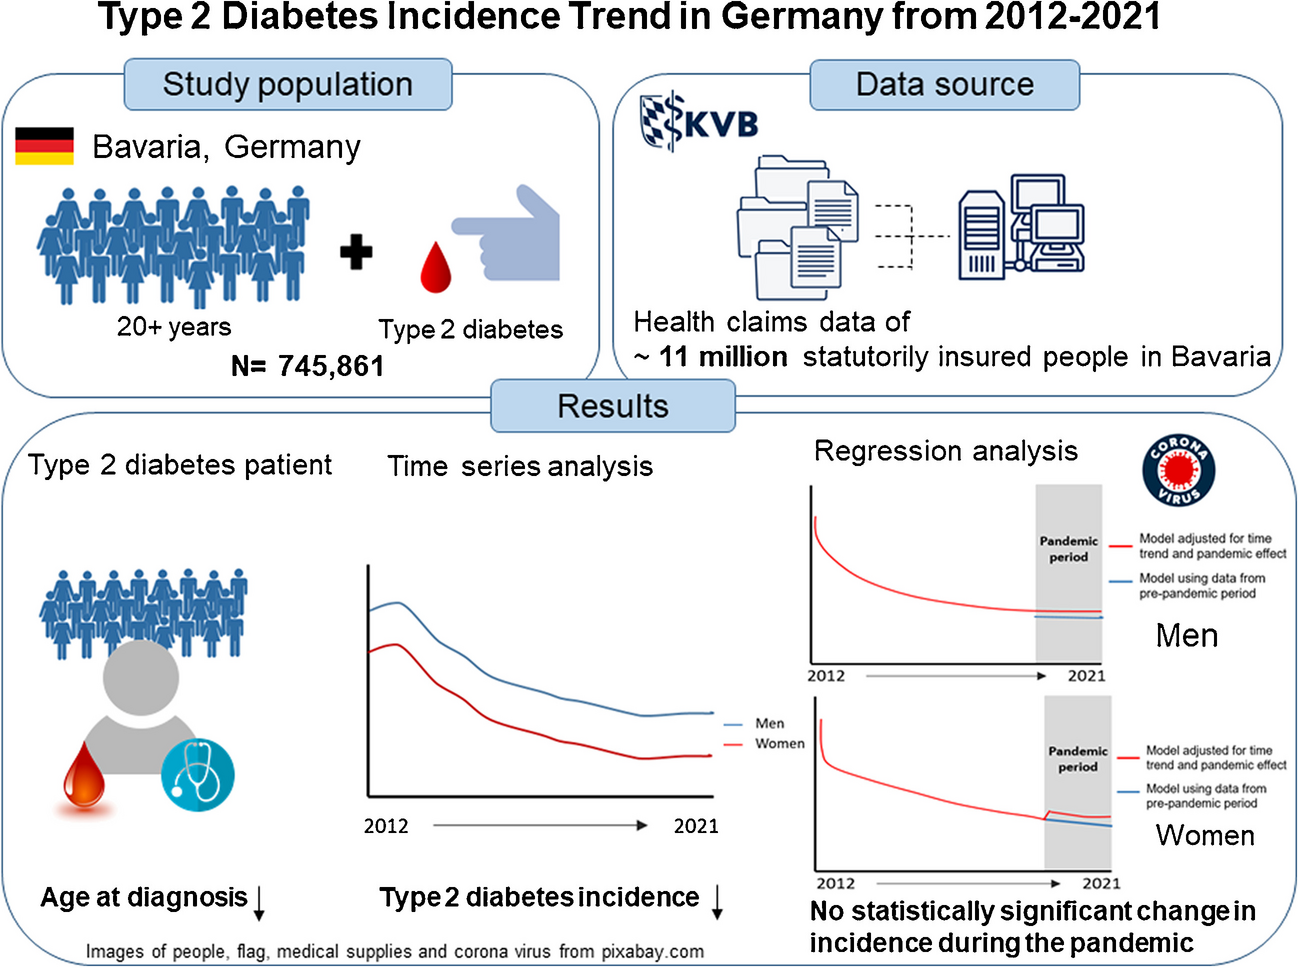 Incidence trend of type 2 diabetes from 2012 to 2021 in Germany: an analysis of health claims data of 11 million statutorily insured people